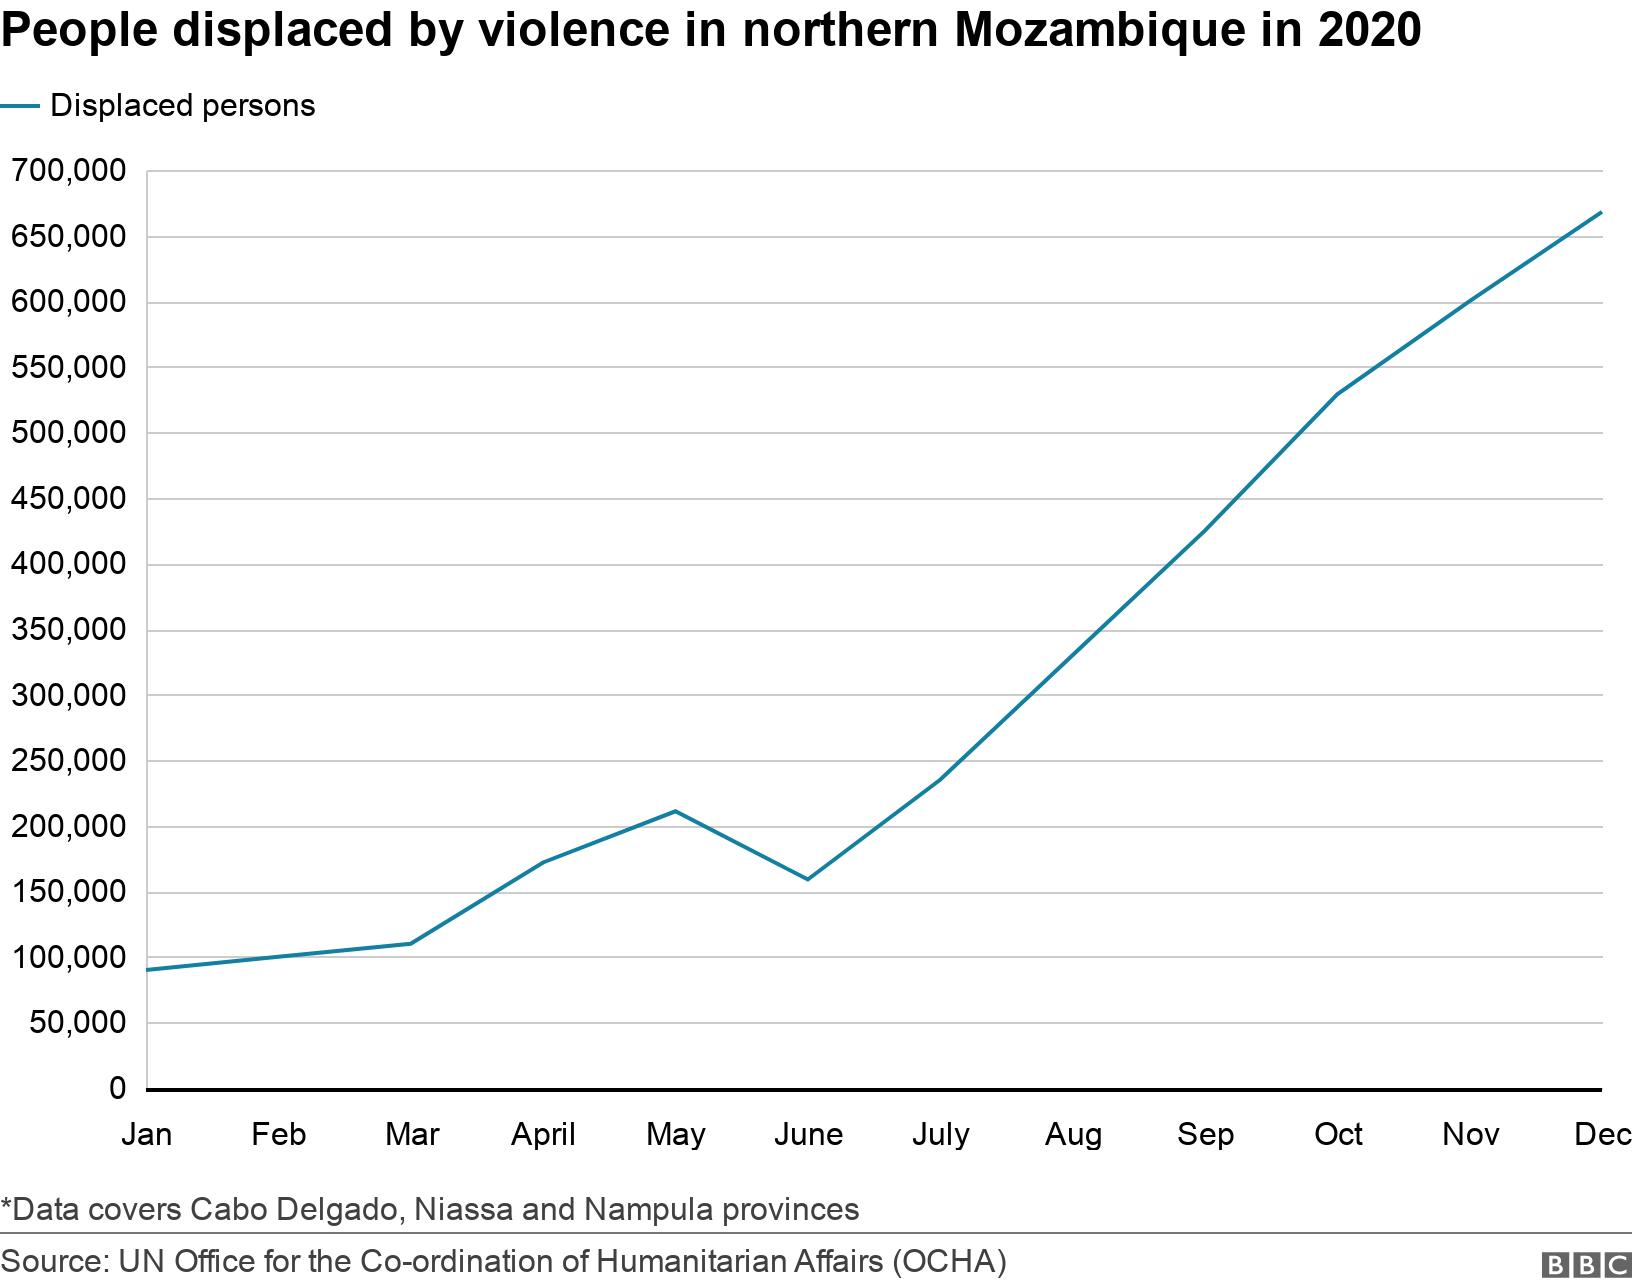 People displaced by violence in northern Mozambique in 2020. .  *Data covers Cabo Delgado, Niassa and Nampula provinces.